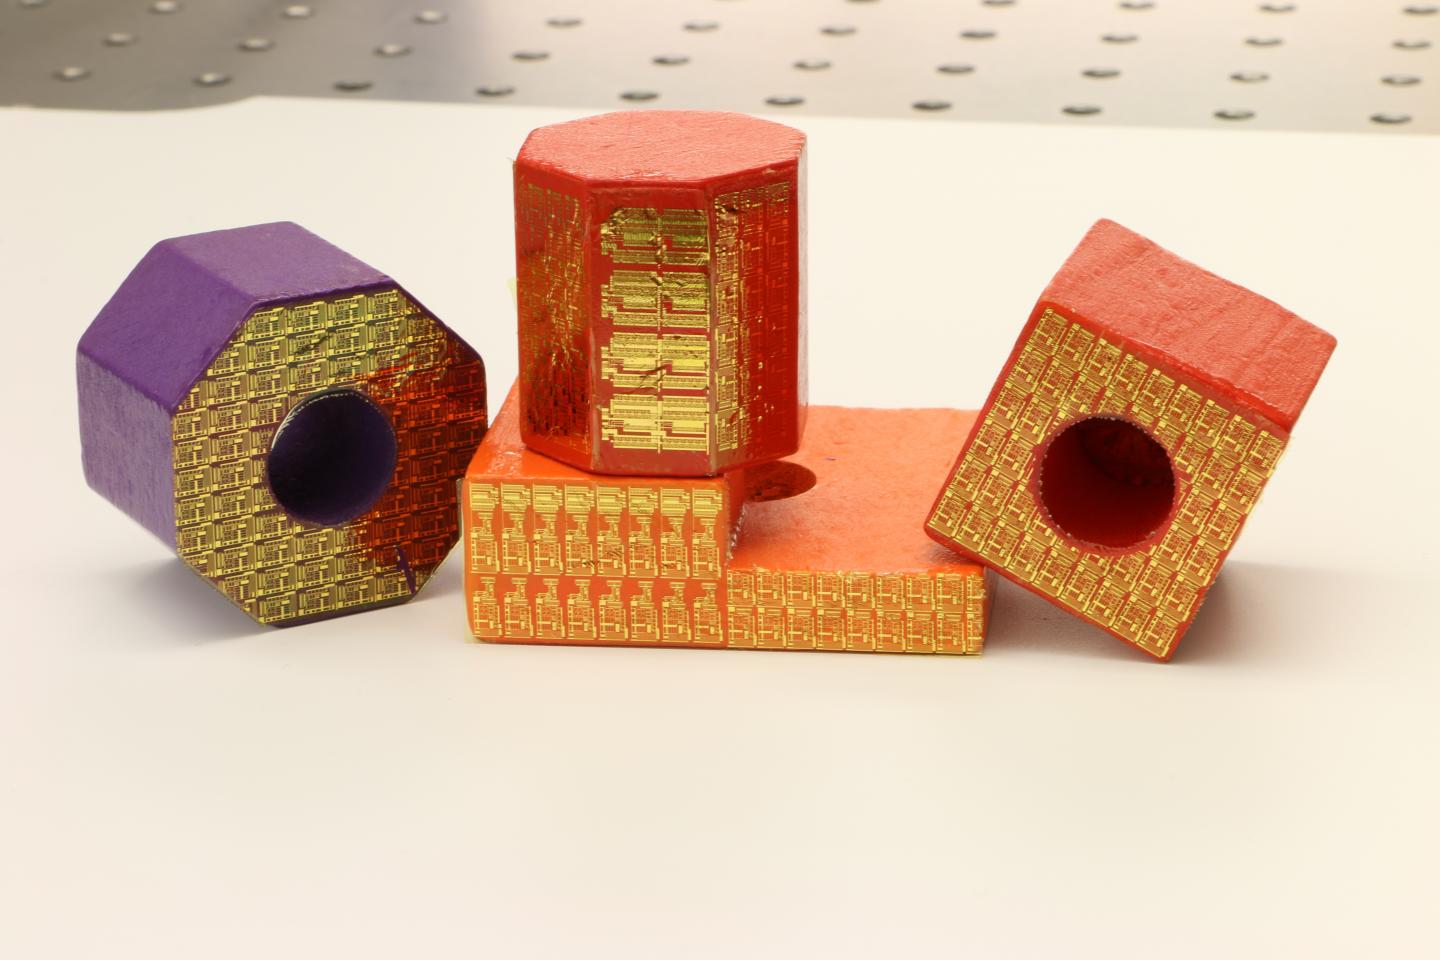 Electronic Stickers on Toy Blocks